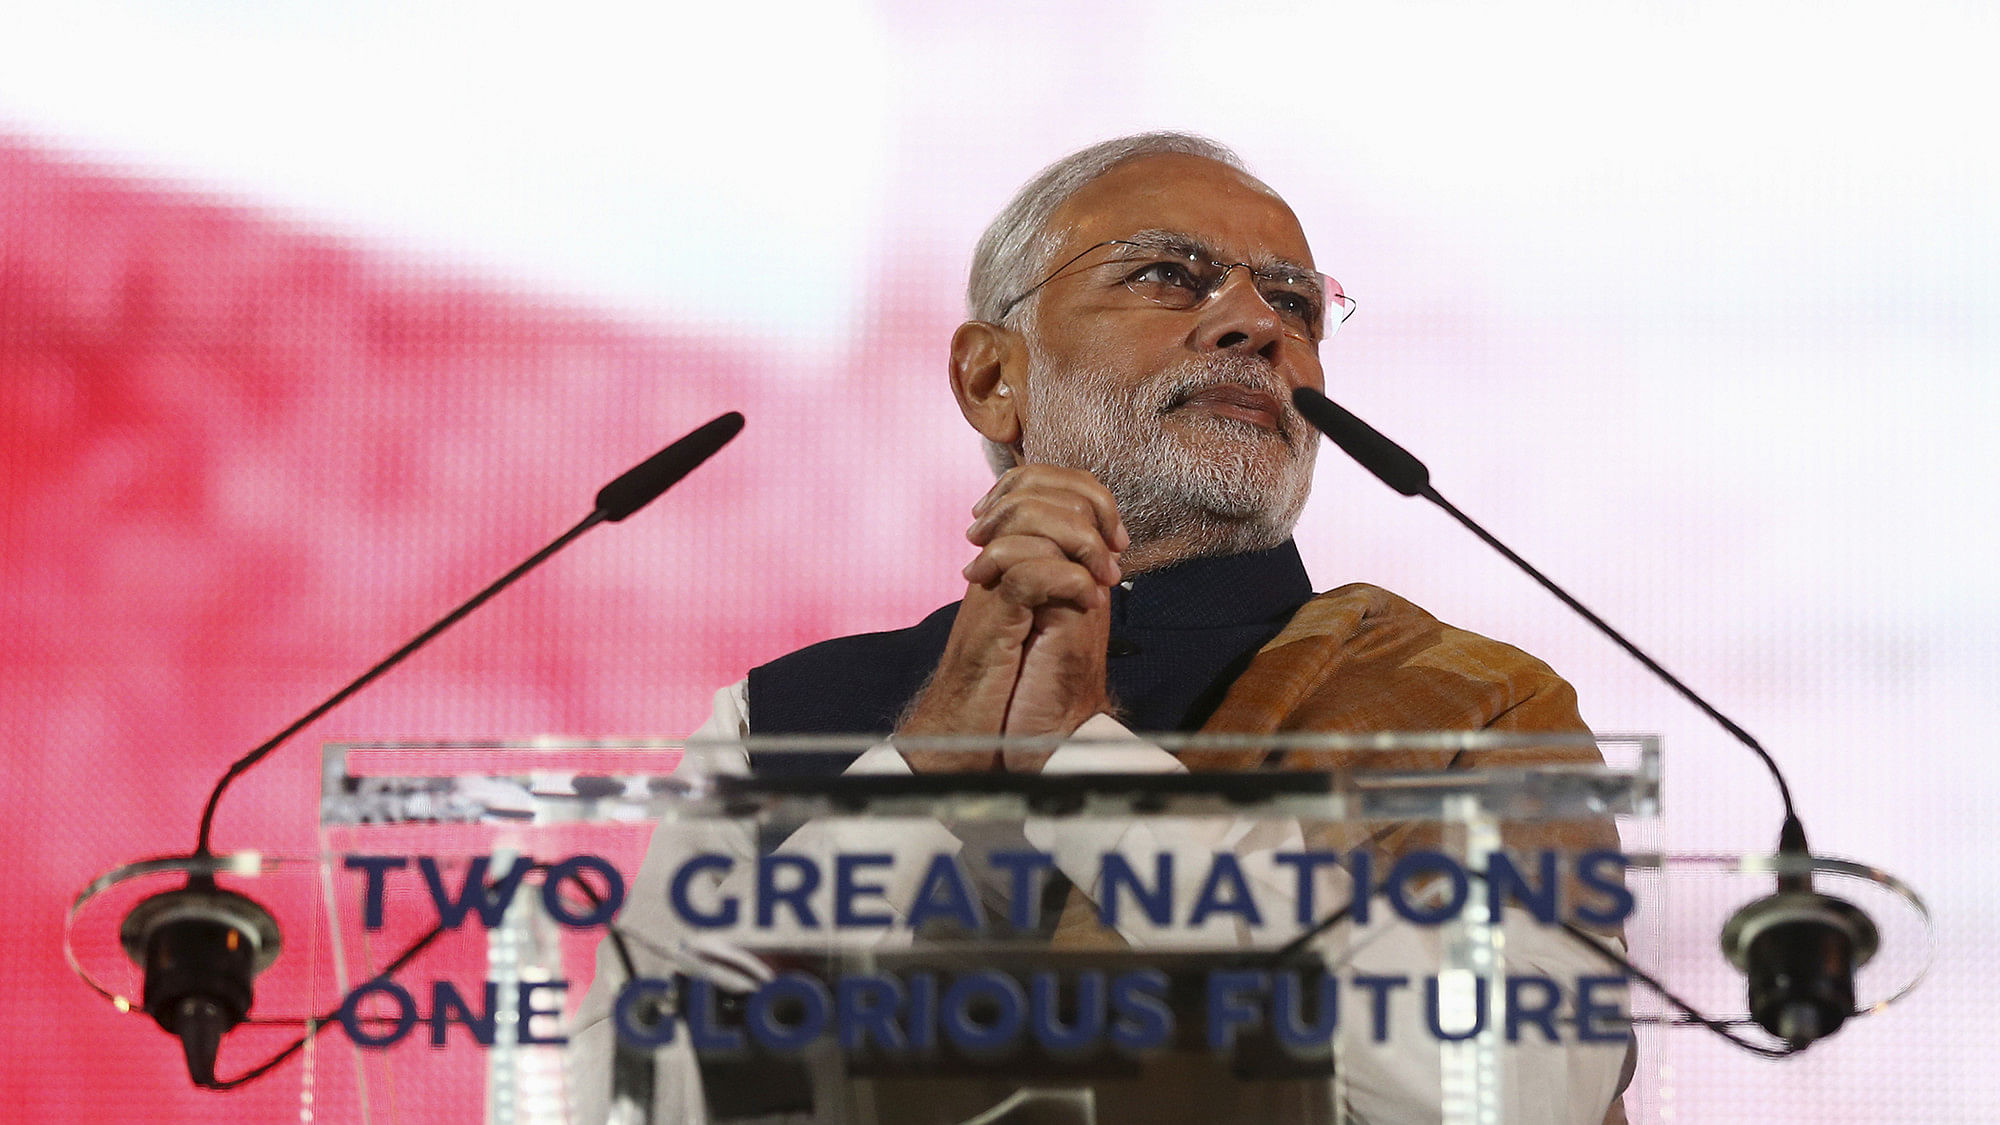 Prime Minister Narendra Modi addressing a welcome rally in his honour at the Wembley Stadium in London. (Photo: Reuters)